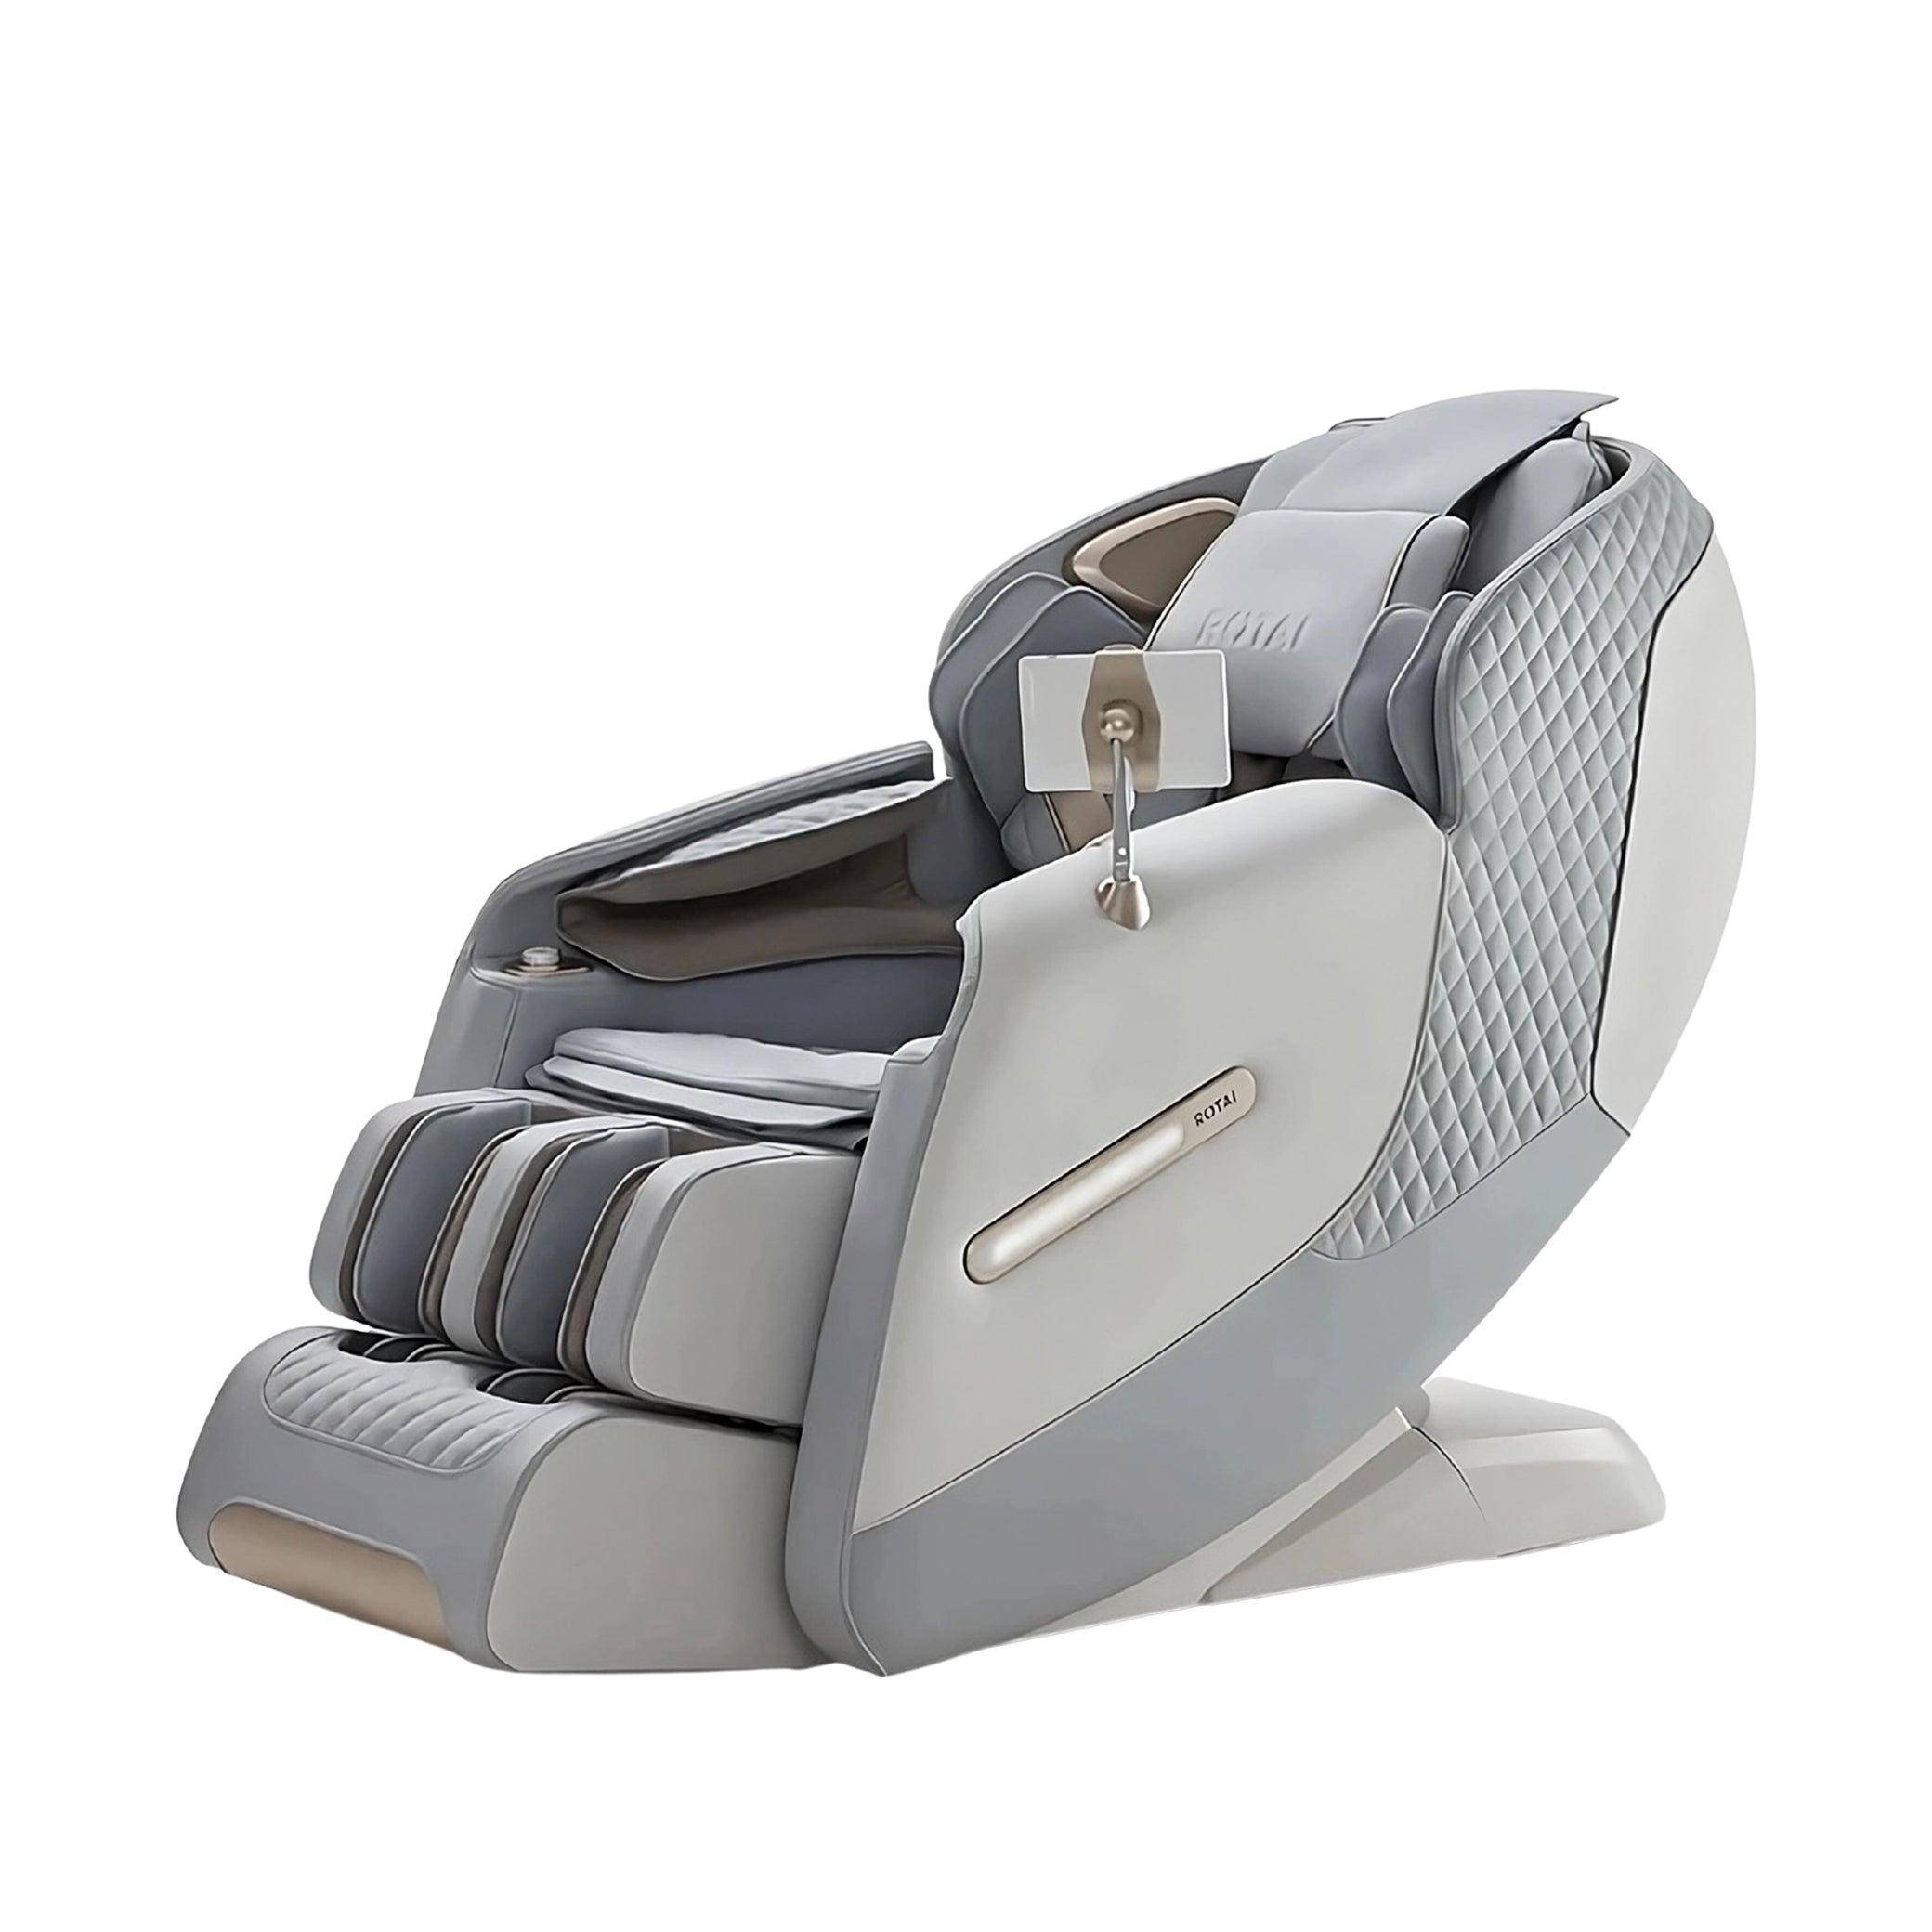 royal omega mssage chair in grey color, massage chair dubai, massage chair saudi, massage chair uae